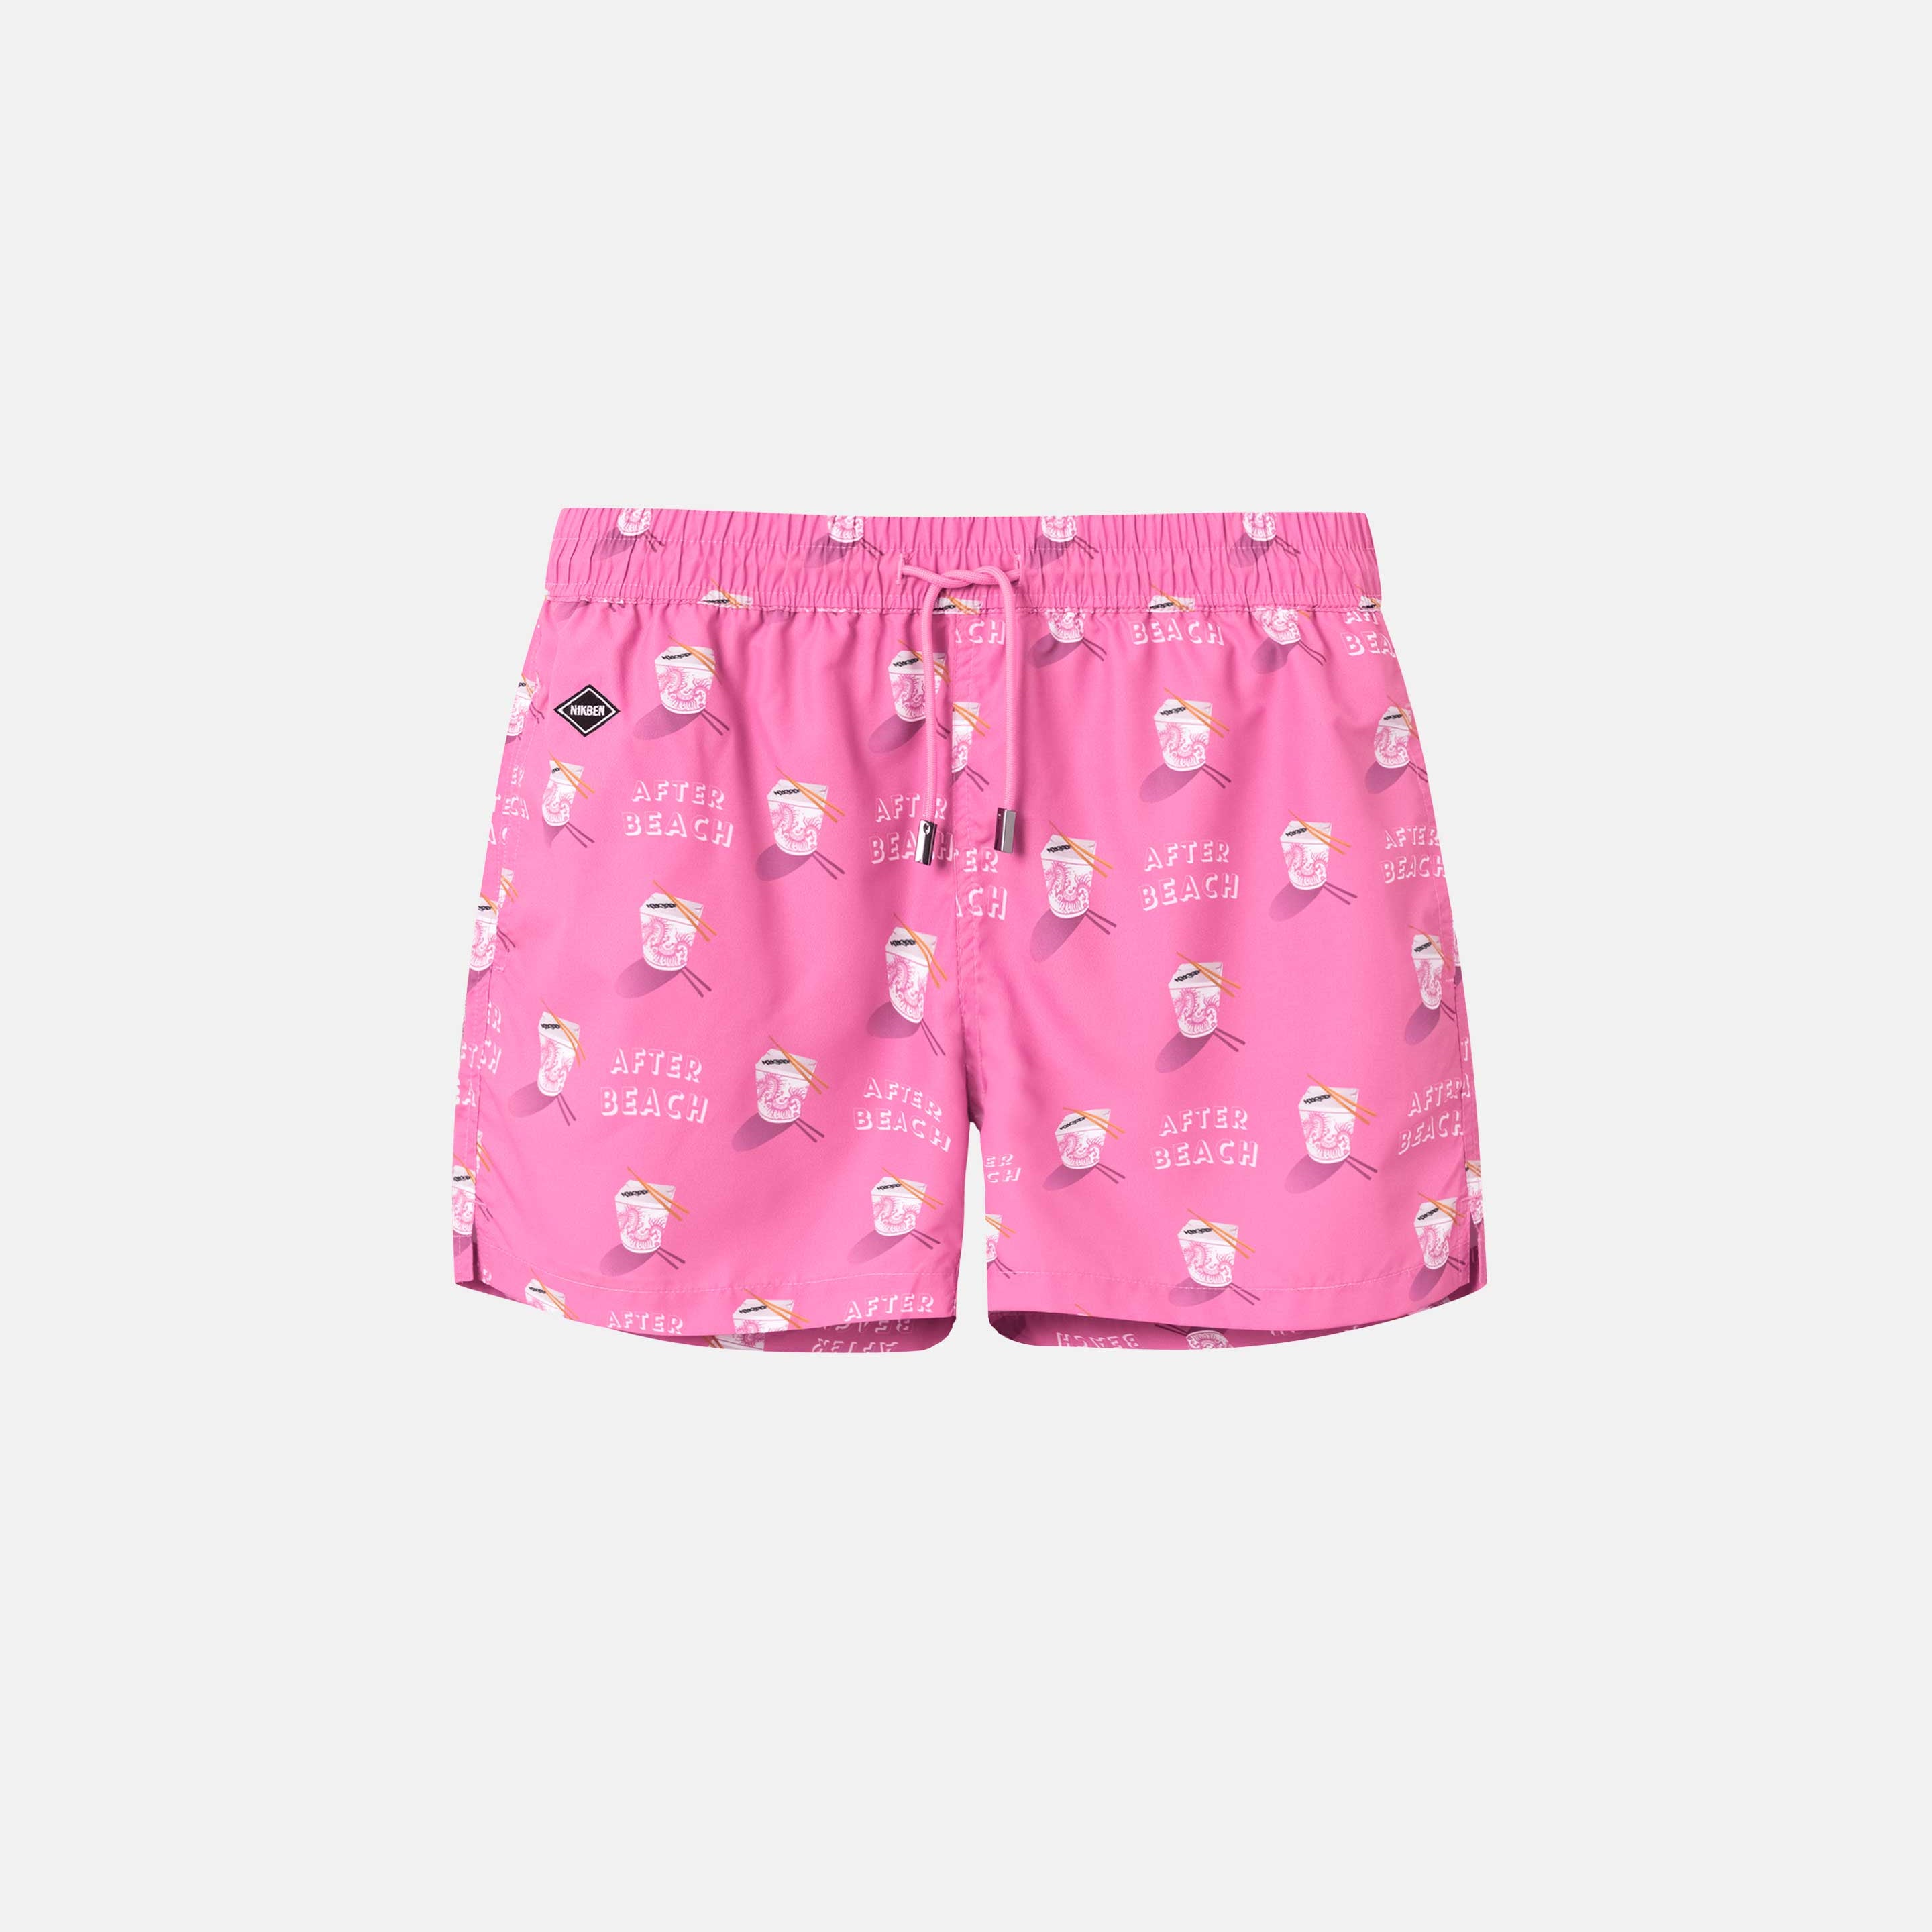 Pink pinted swim trunks. Mid length shorts with drawstring waistband and two side pockets.